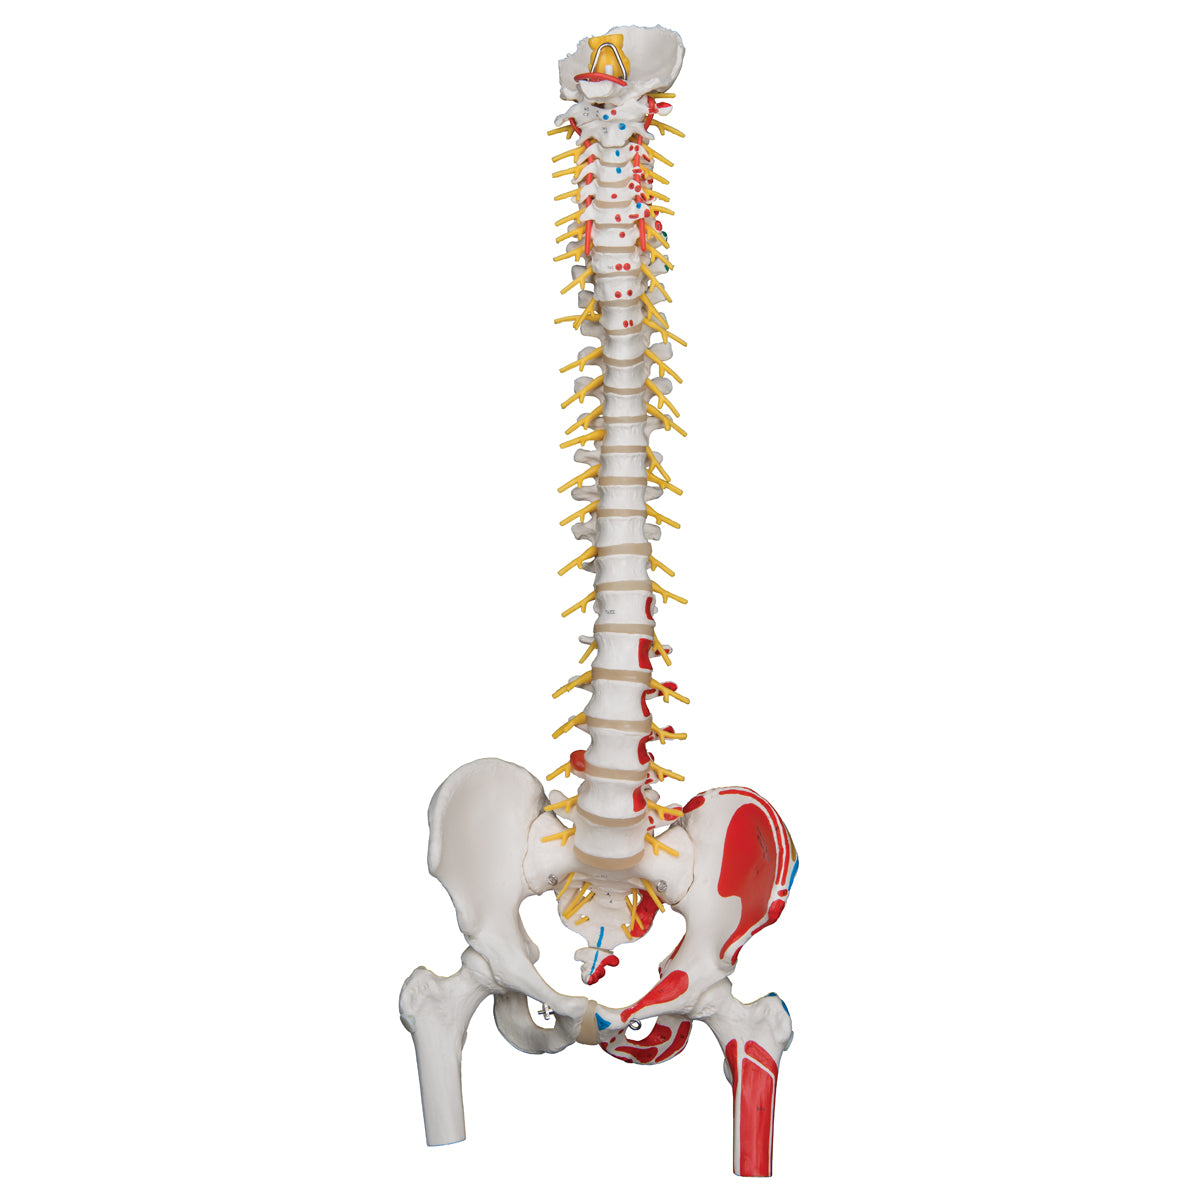 Flexible model of the spine with nerves, muscle indications and other bones without stand